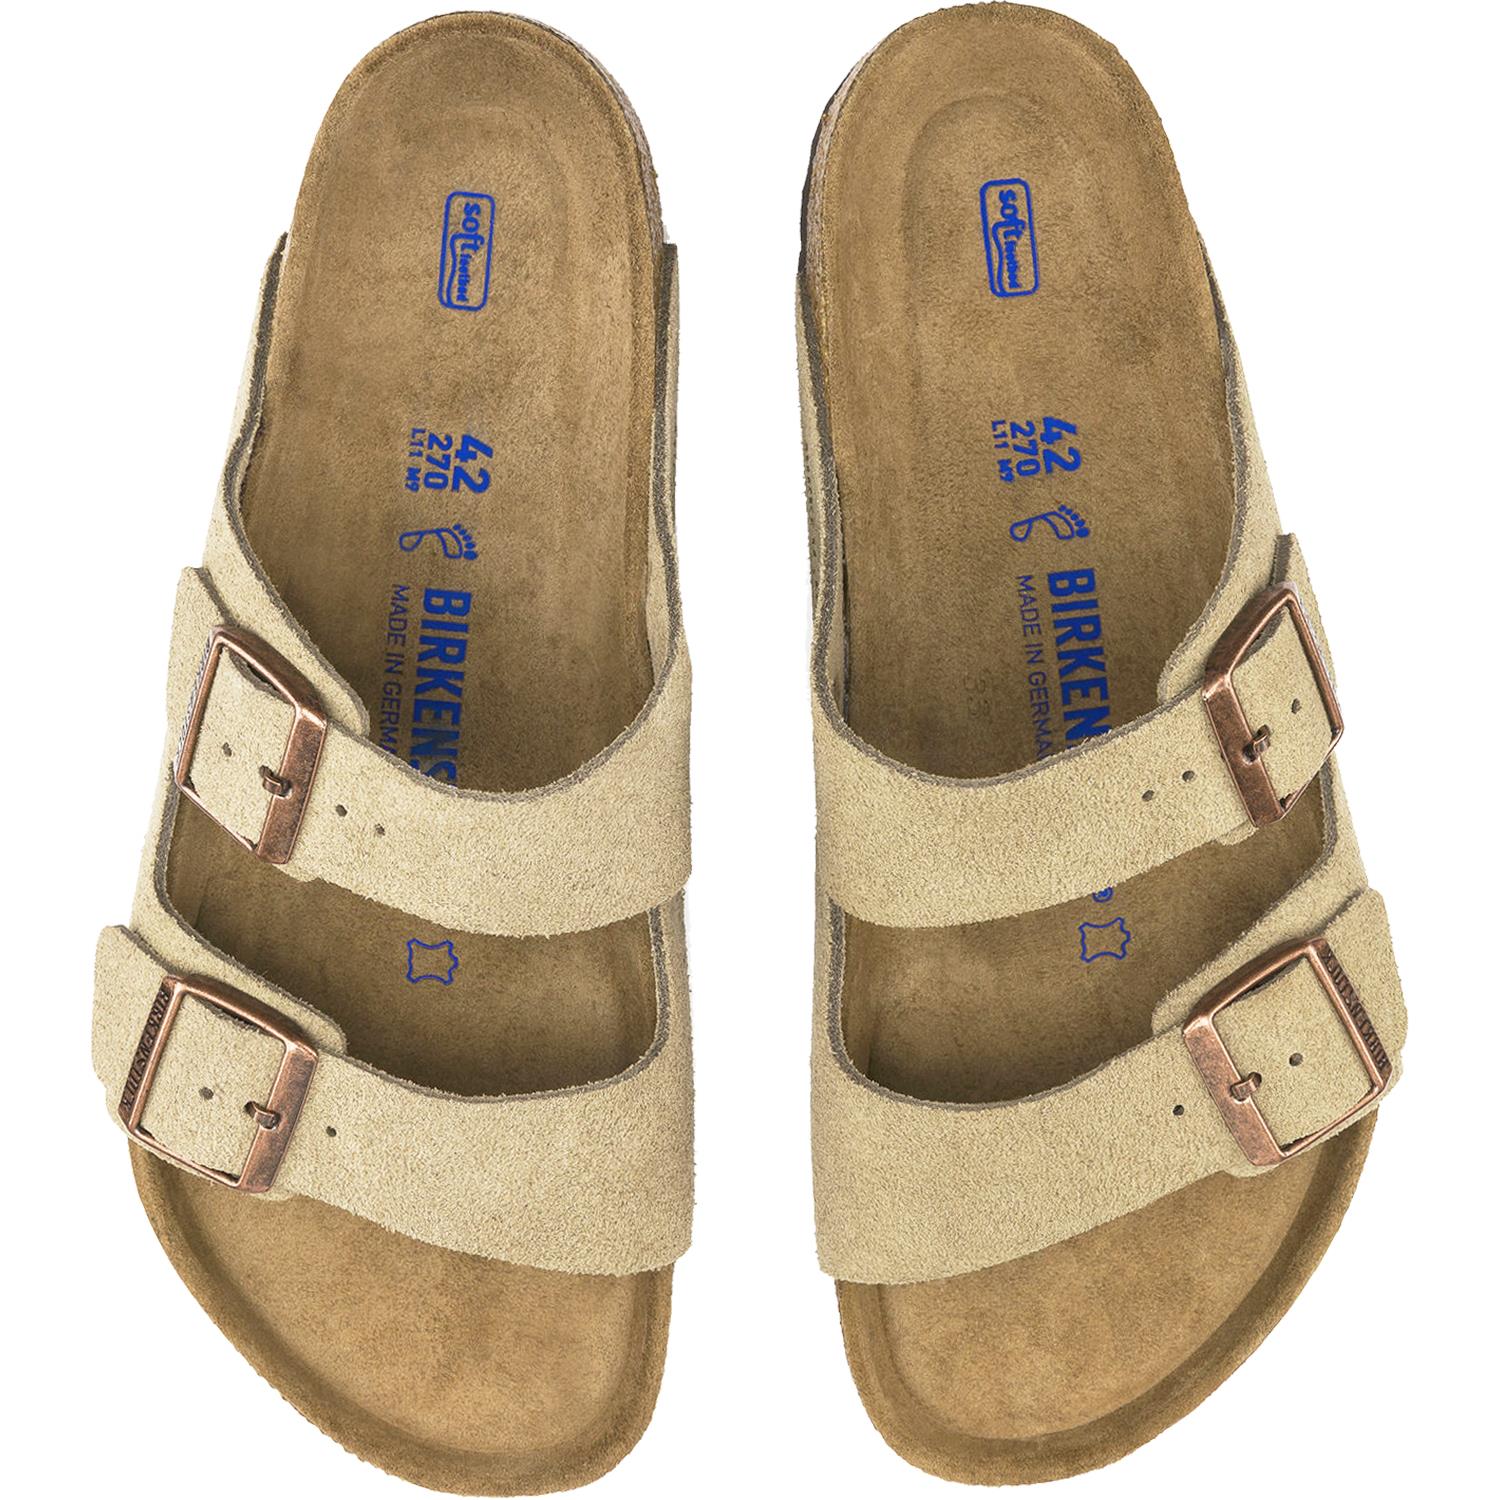 Birkenstock Arizona Soft Footbed Sandal in Taupe Suede at Mar-Lou Shoes N / 44